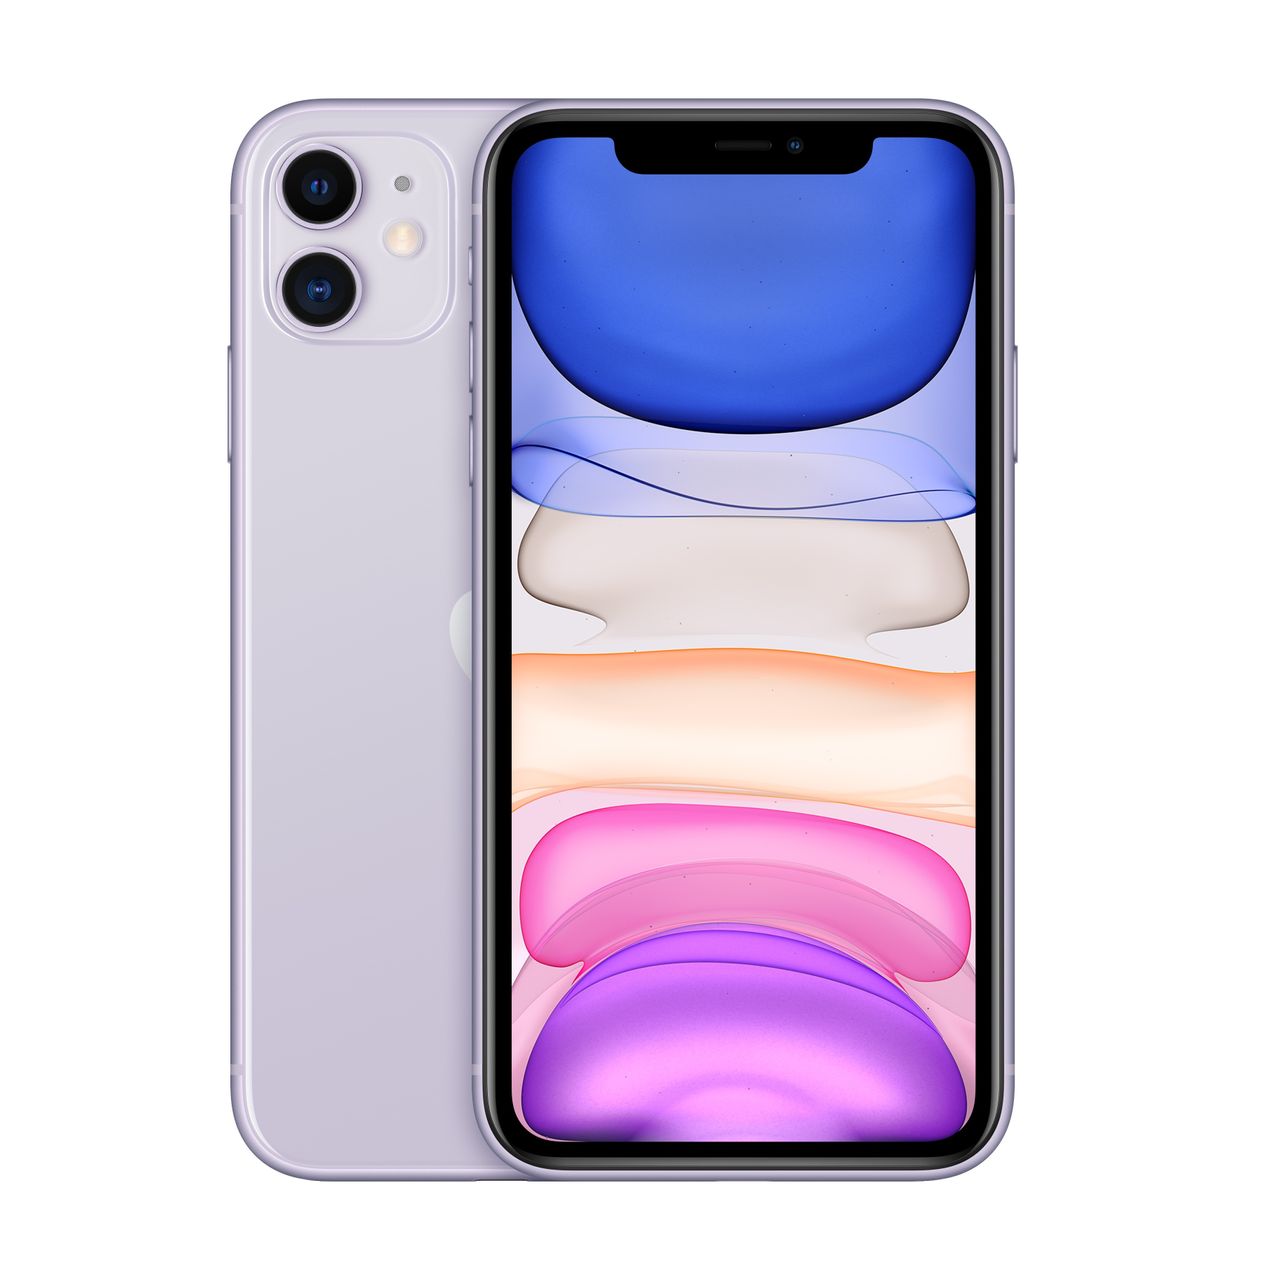 Apple iPhone 11 64GB in Purple Review